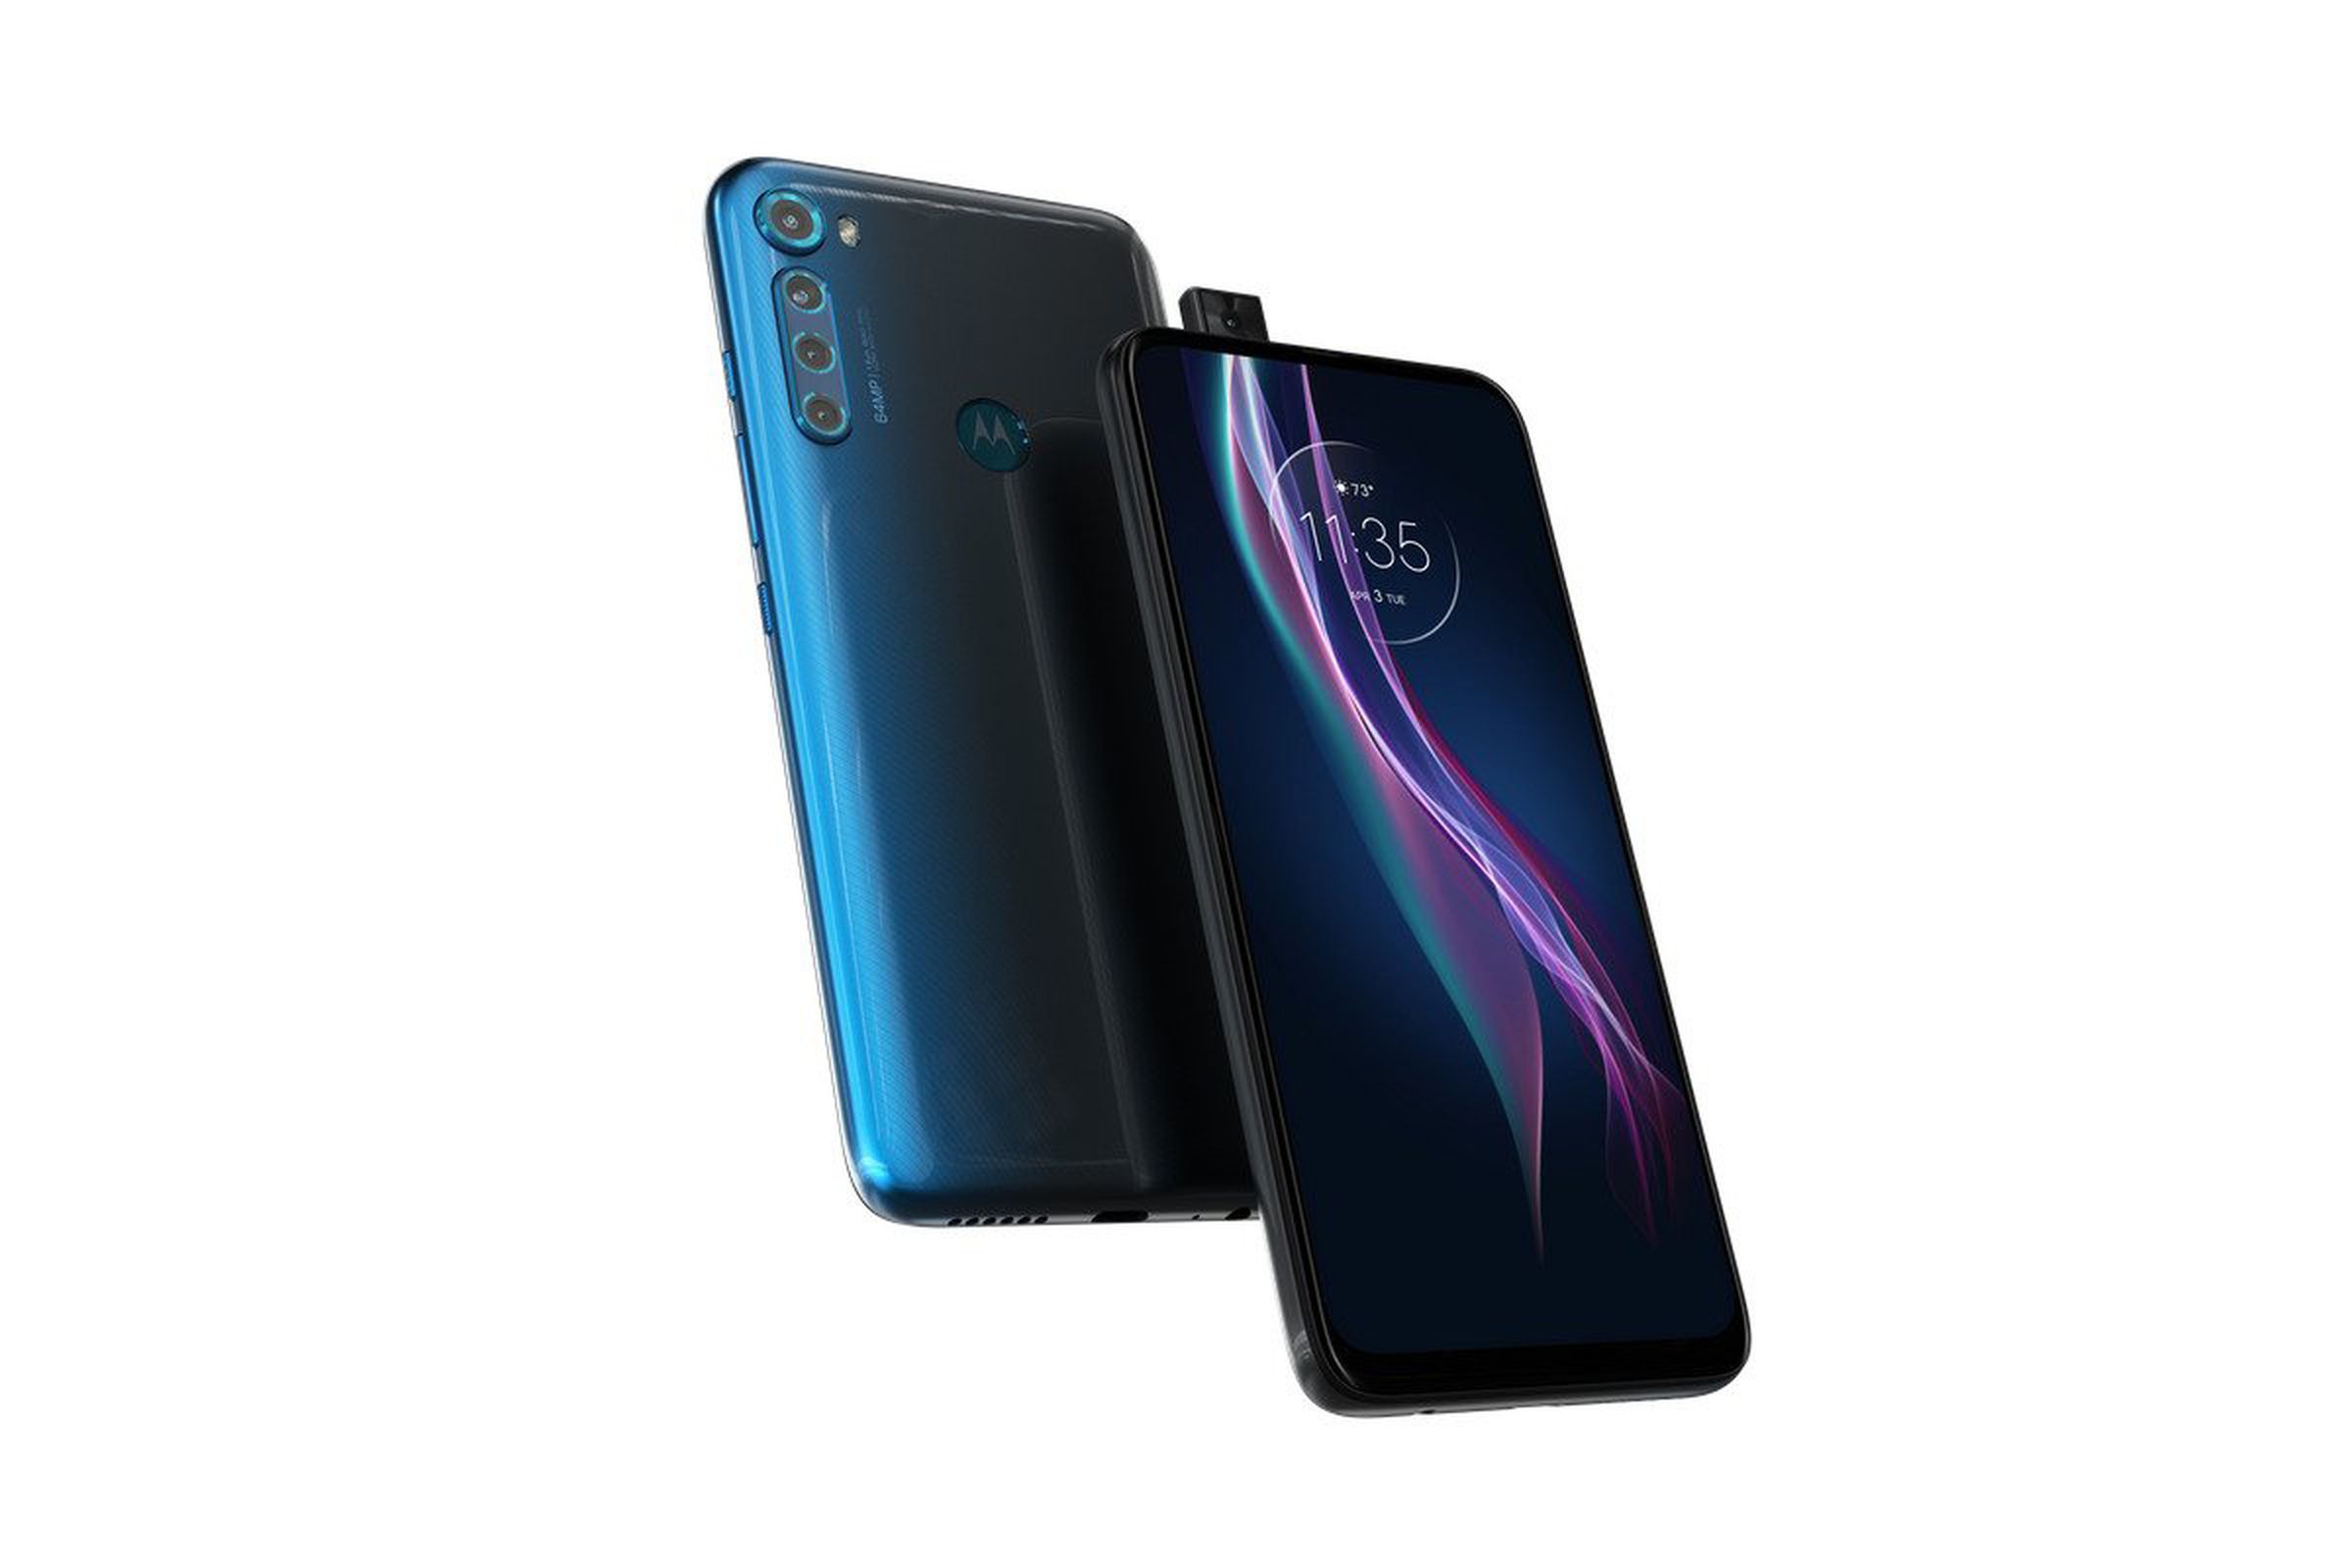 The Motorola One Fusion Plus has four rear cameras and a pop-up selfie camera.